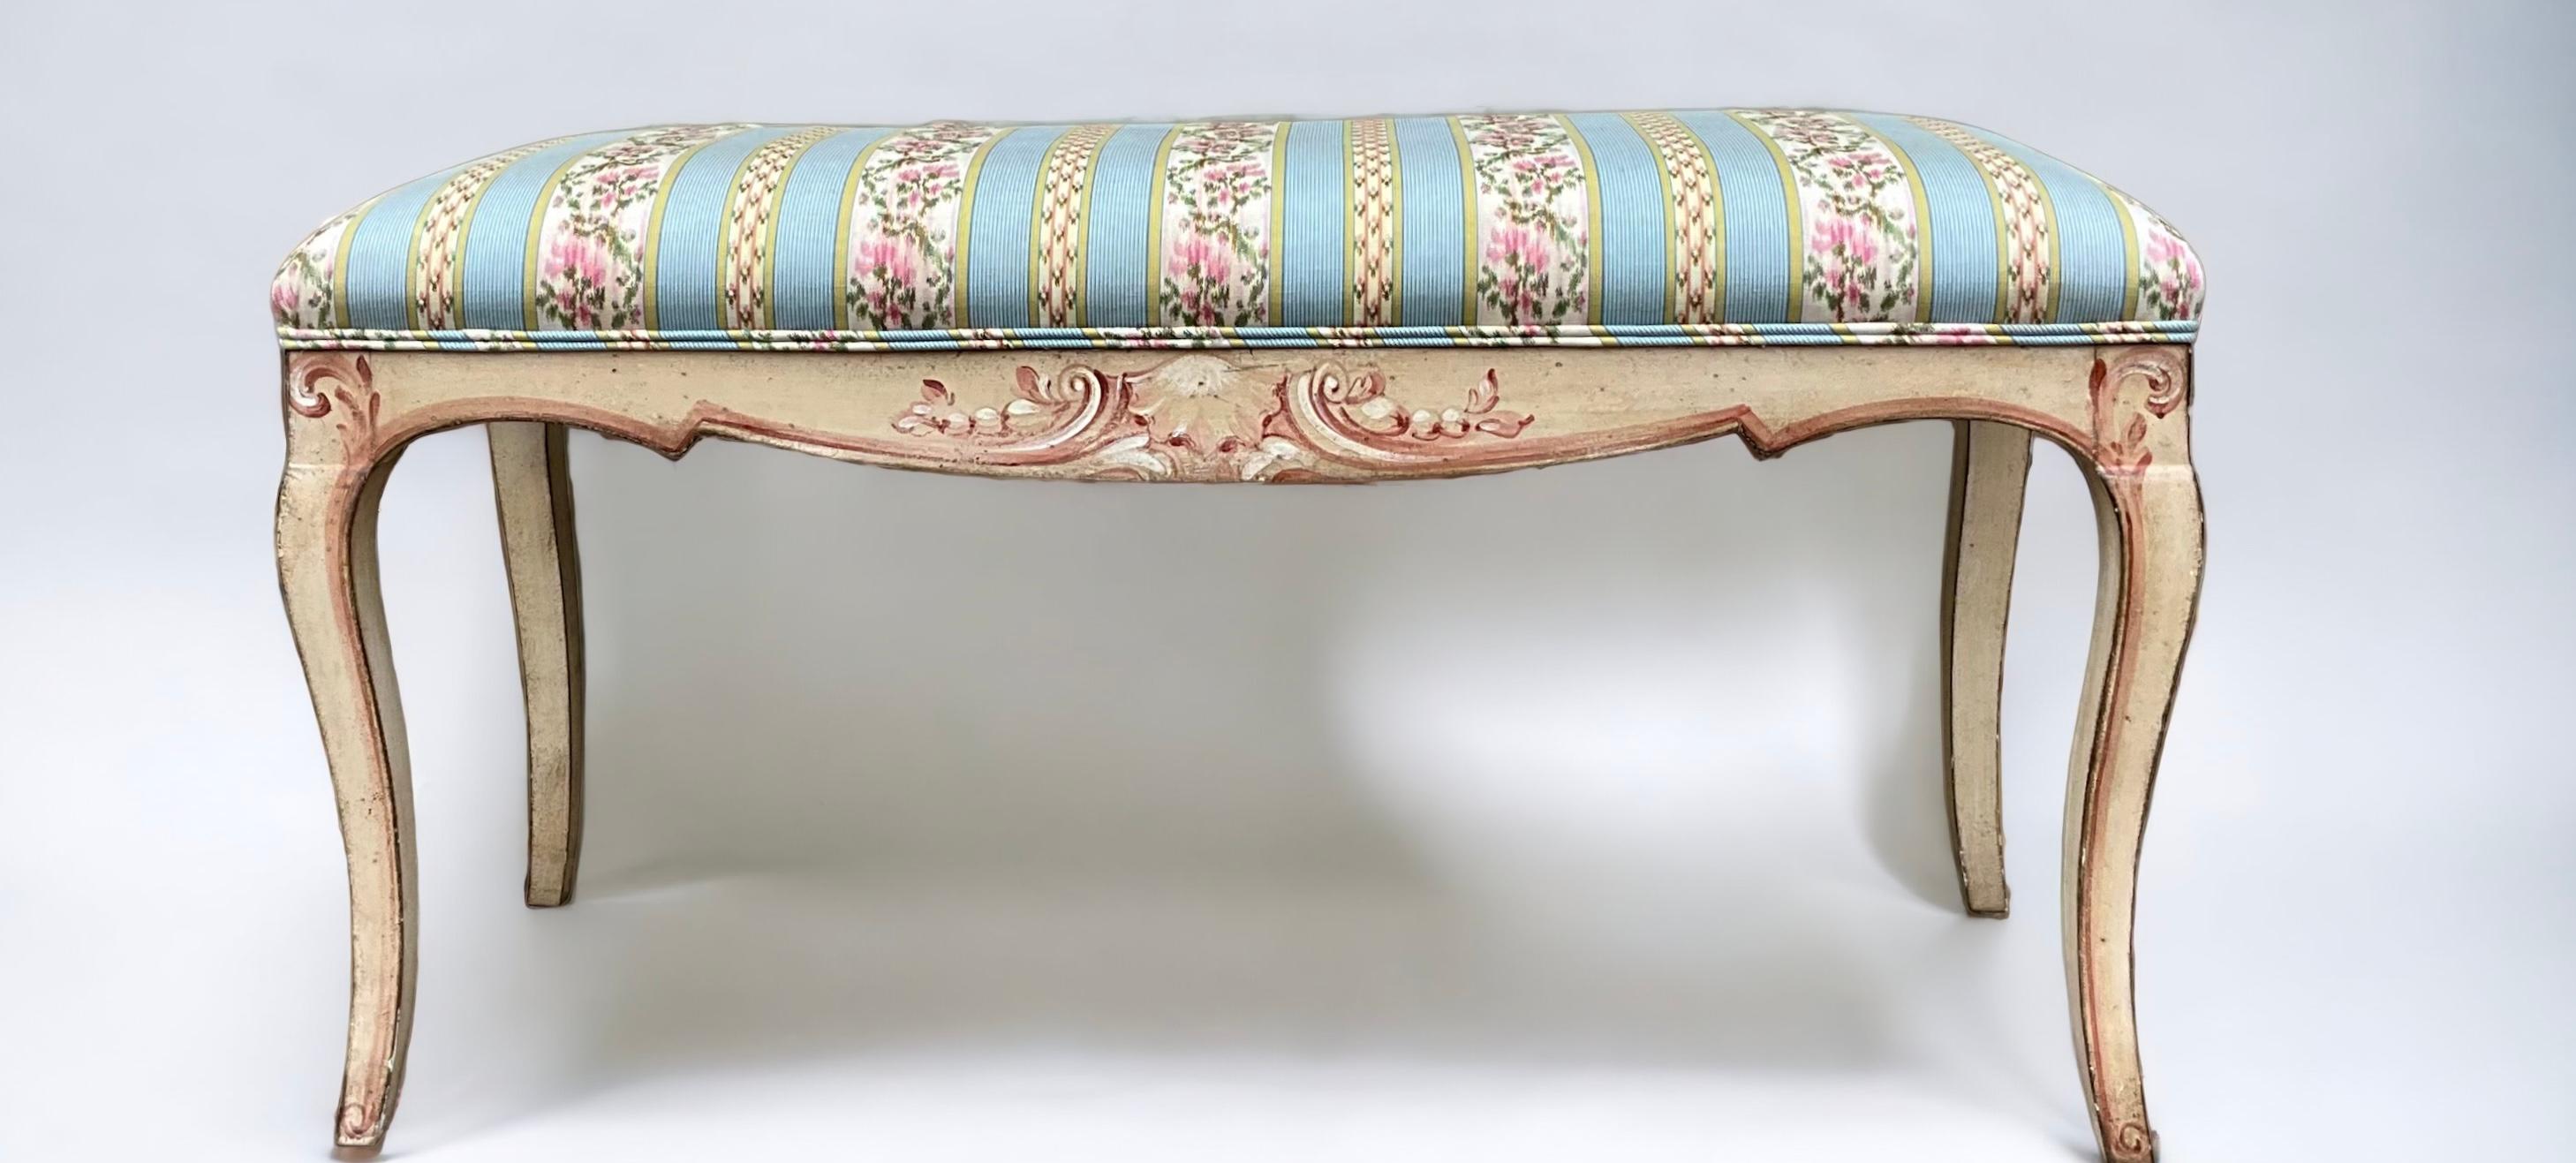 This is a sweet bench! It is an Italian piece with hand painted scrolling shells and vintage striped floral chintz cotton. It is in very good vintage condition and is unmarked.b